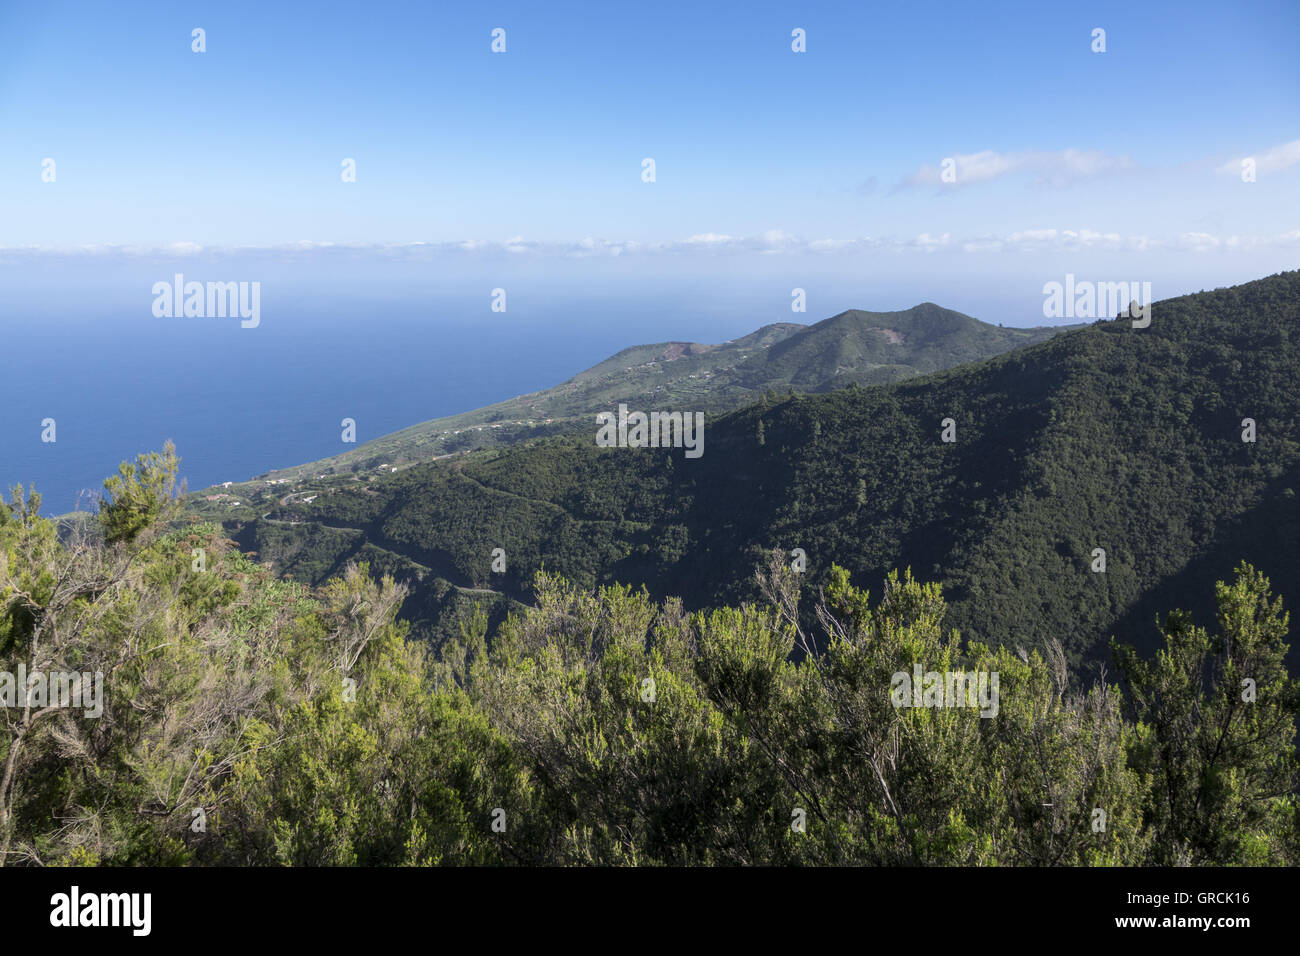 View From A Viewpoint Over A Canyon And Wooded Hills Down To The Atlantic Ocean, Blue Sky With Small Clouds. Northwestern Part Of The Canary Island La Palma Stock Photo